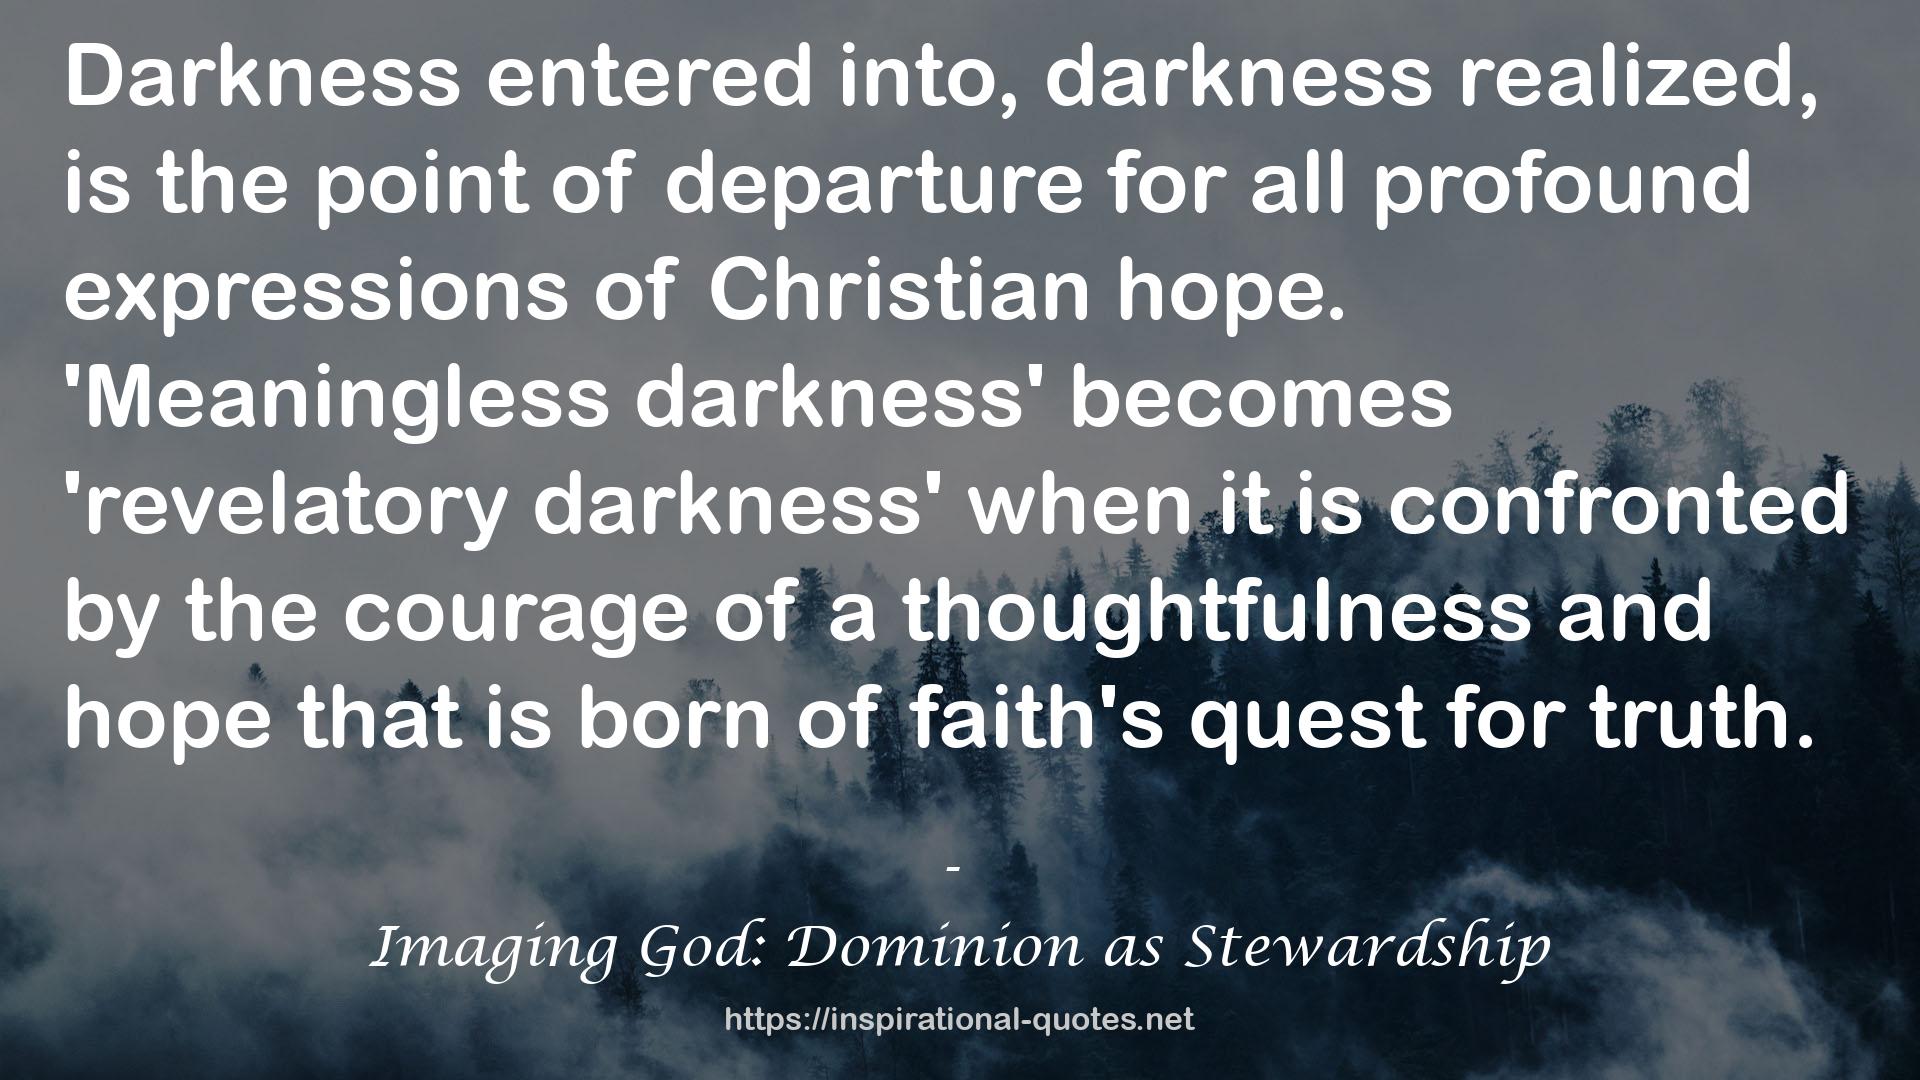 Imaging God: Dominion as Stewardship QUOTES